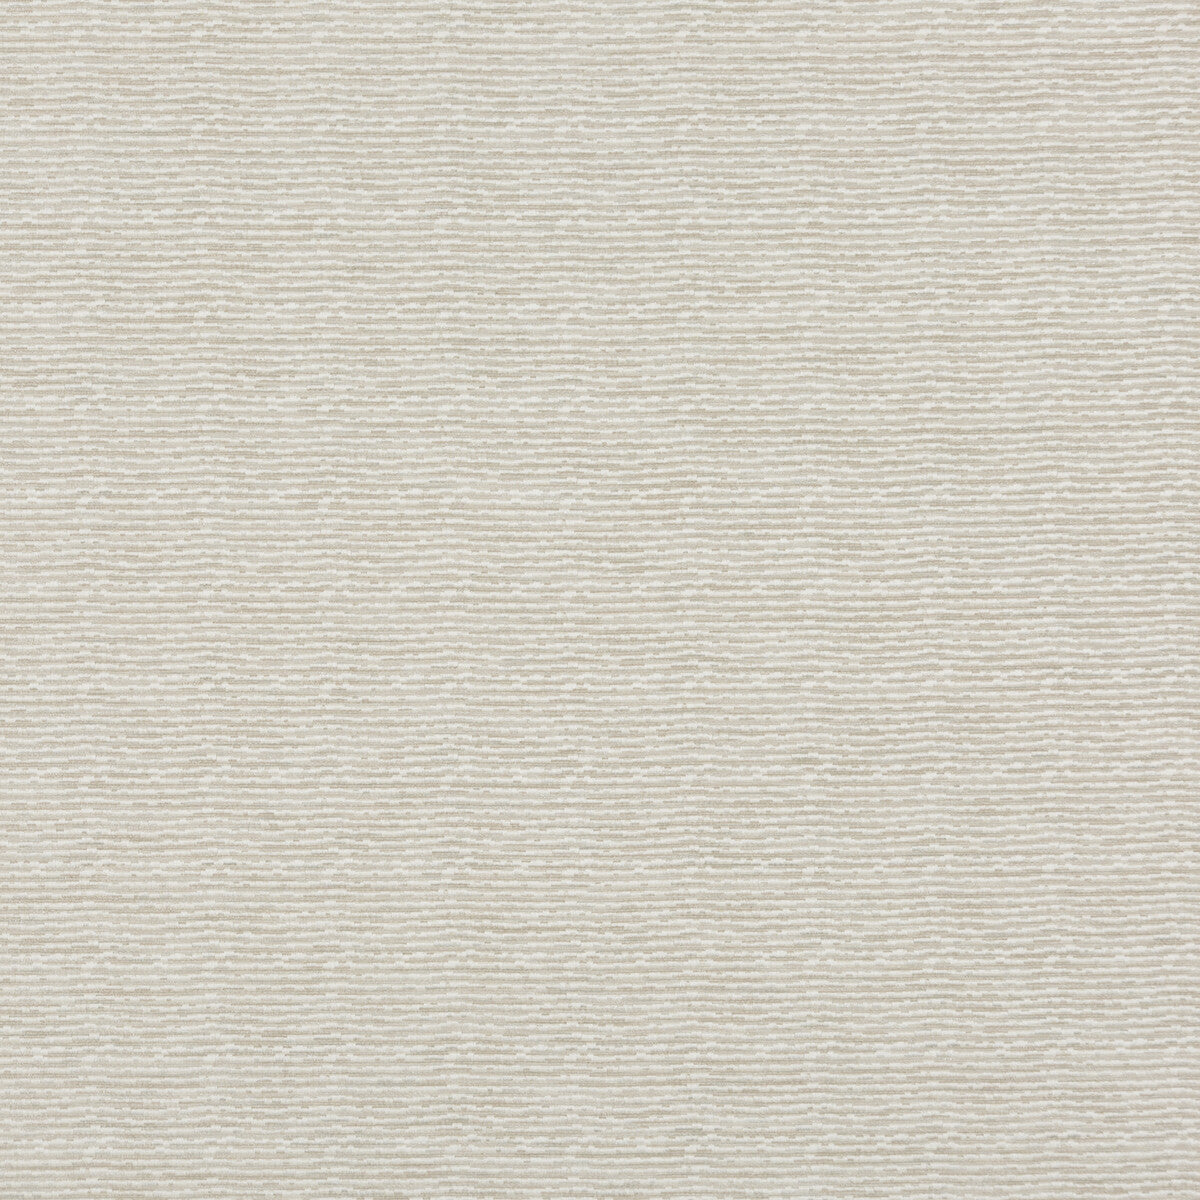 Esker fabric in pearl color - pattern BF10685.108.0 - by G P &amp; J Baker in the Essential Colours collection